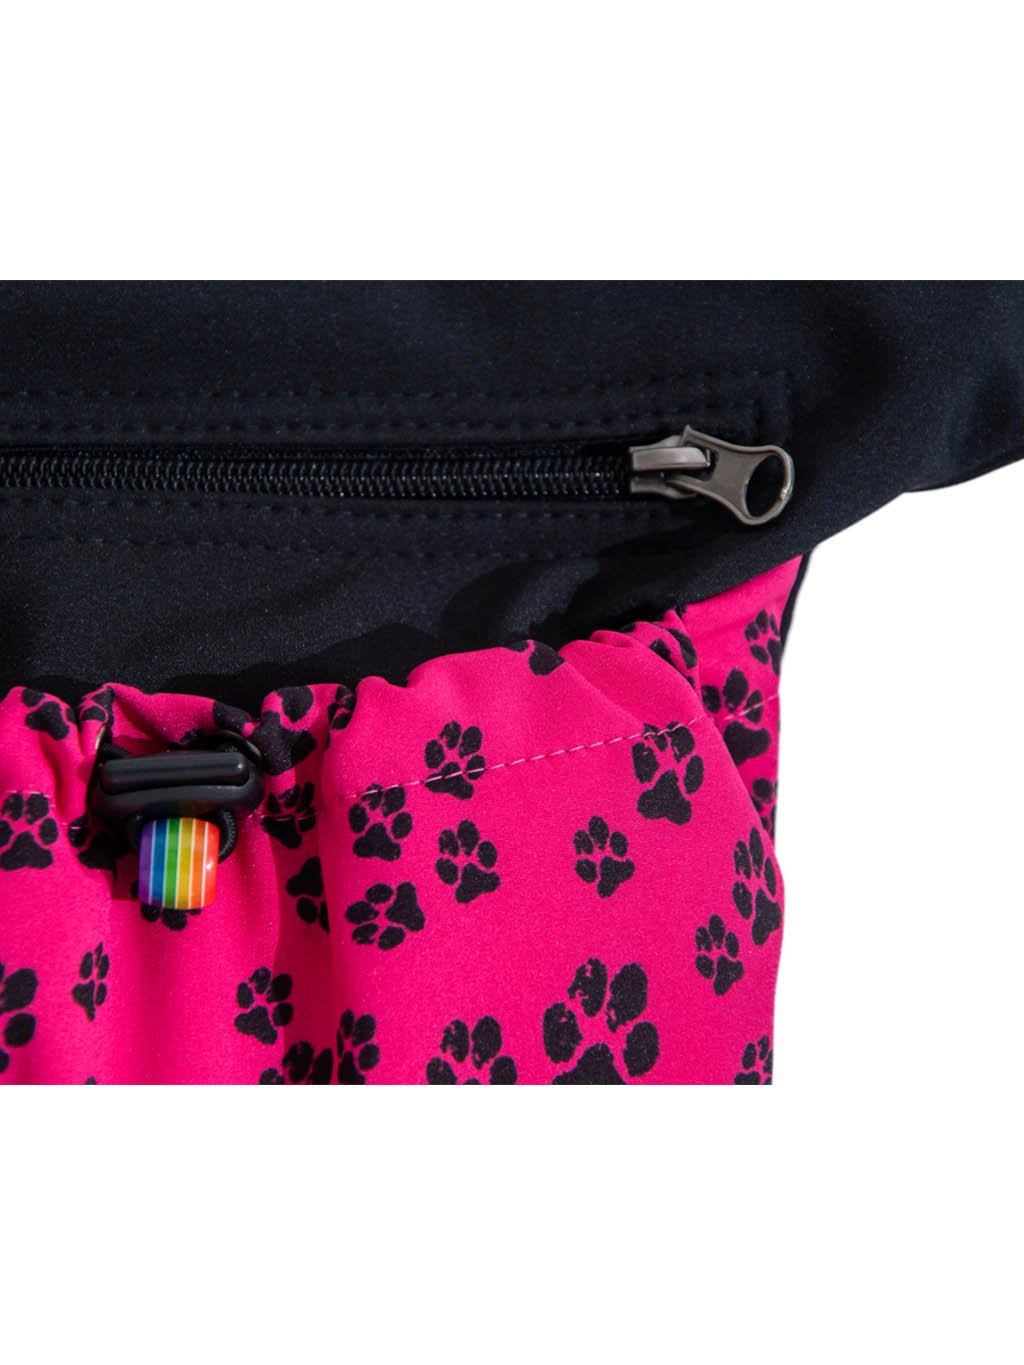 Treat bag 2in1 pink with paws 4dox